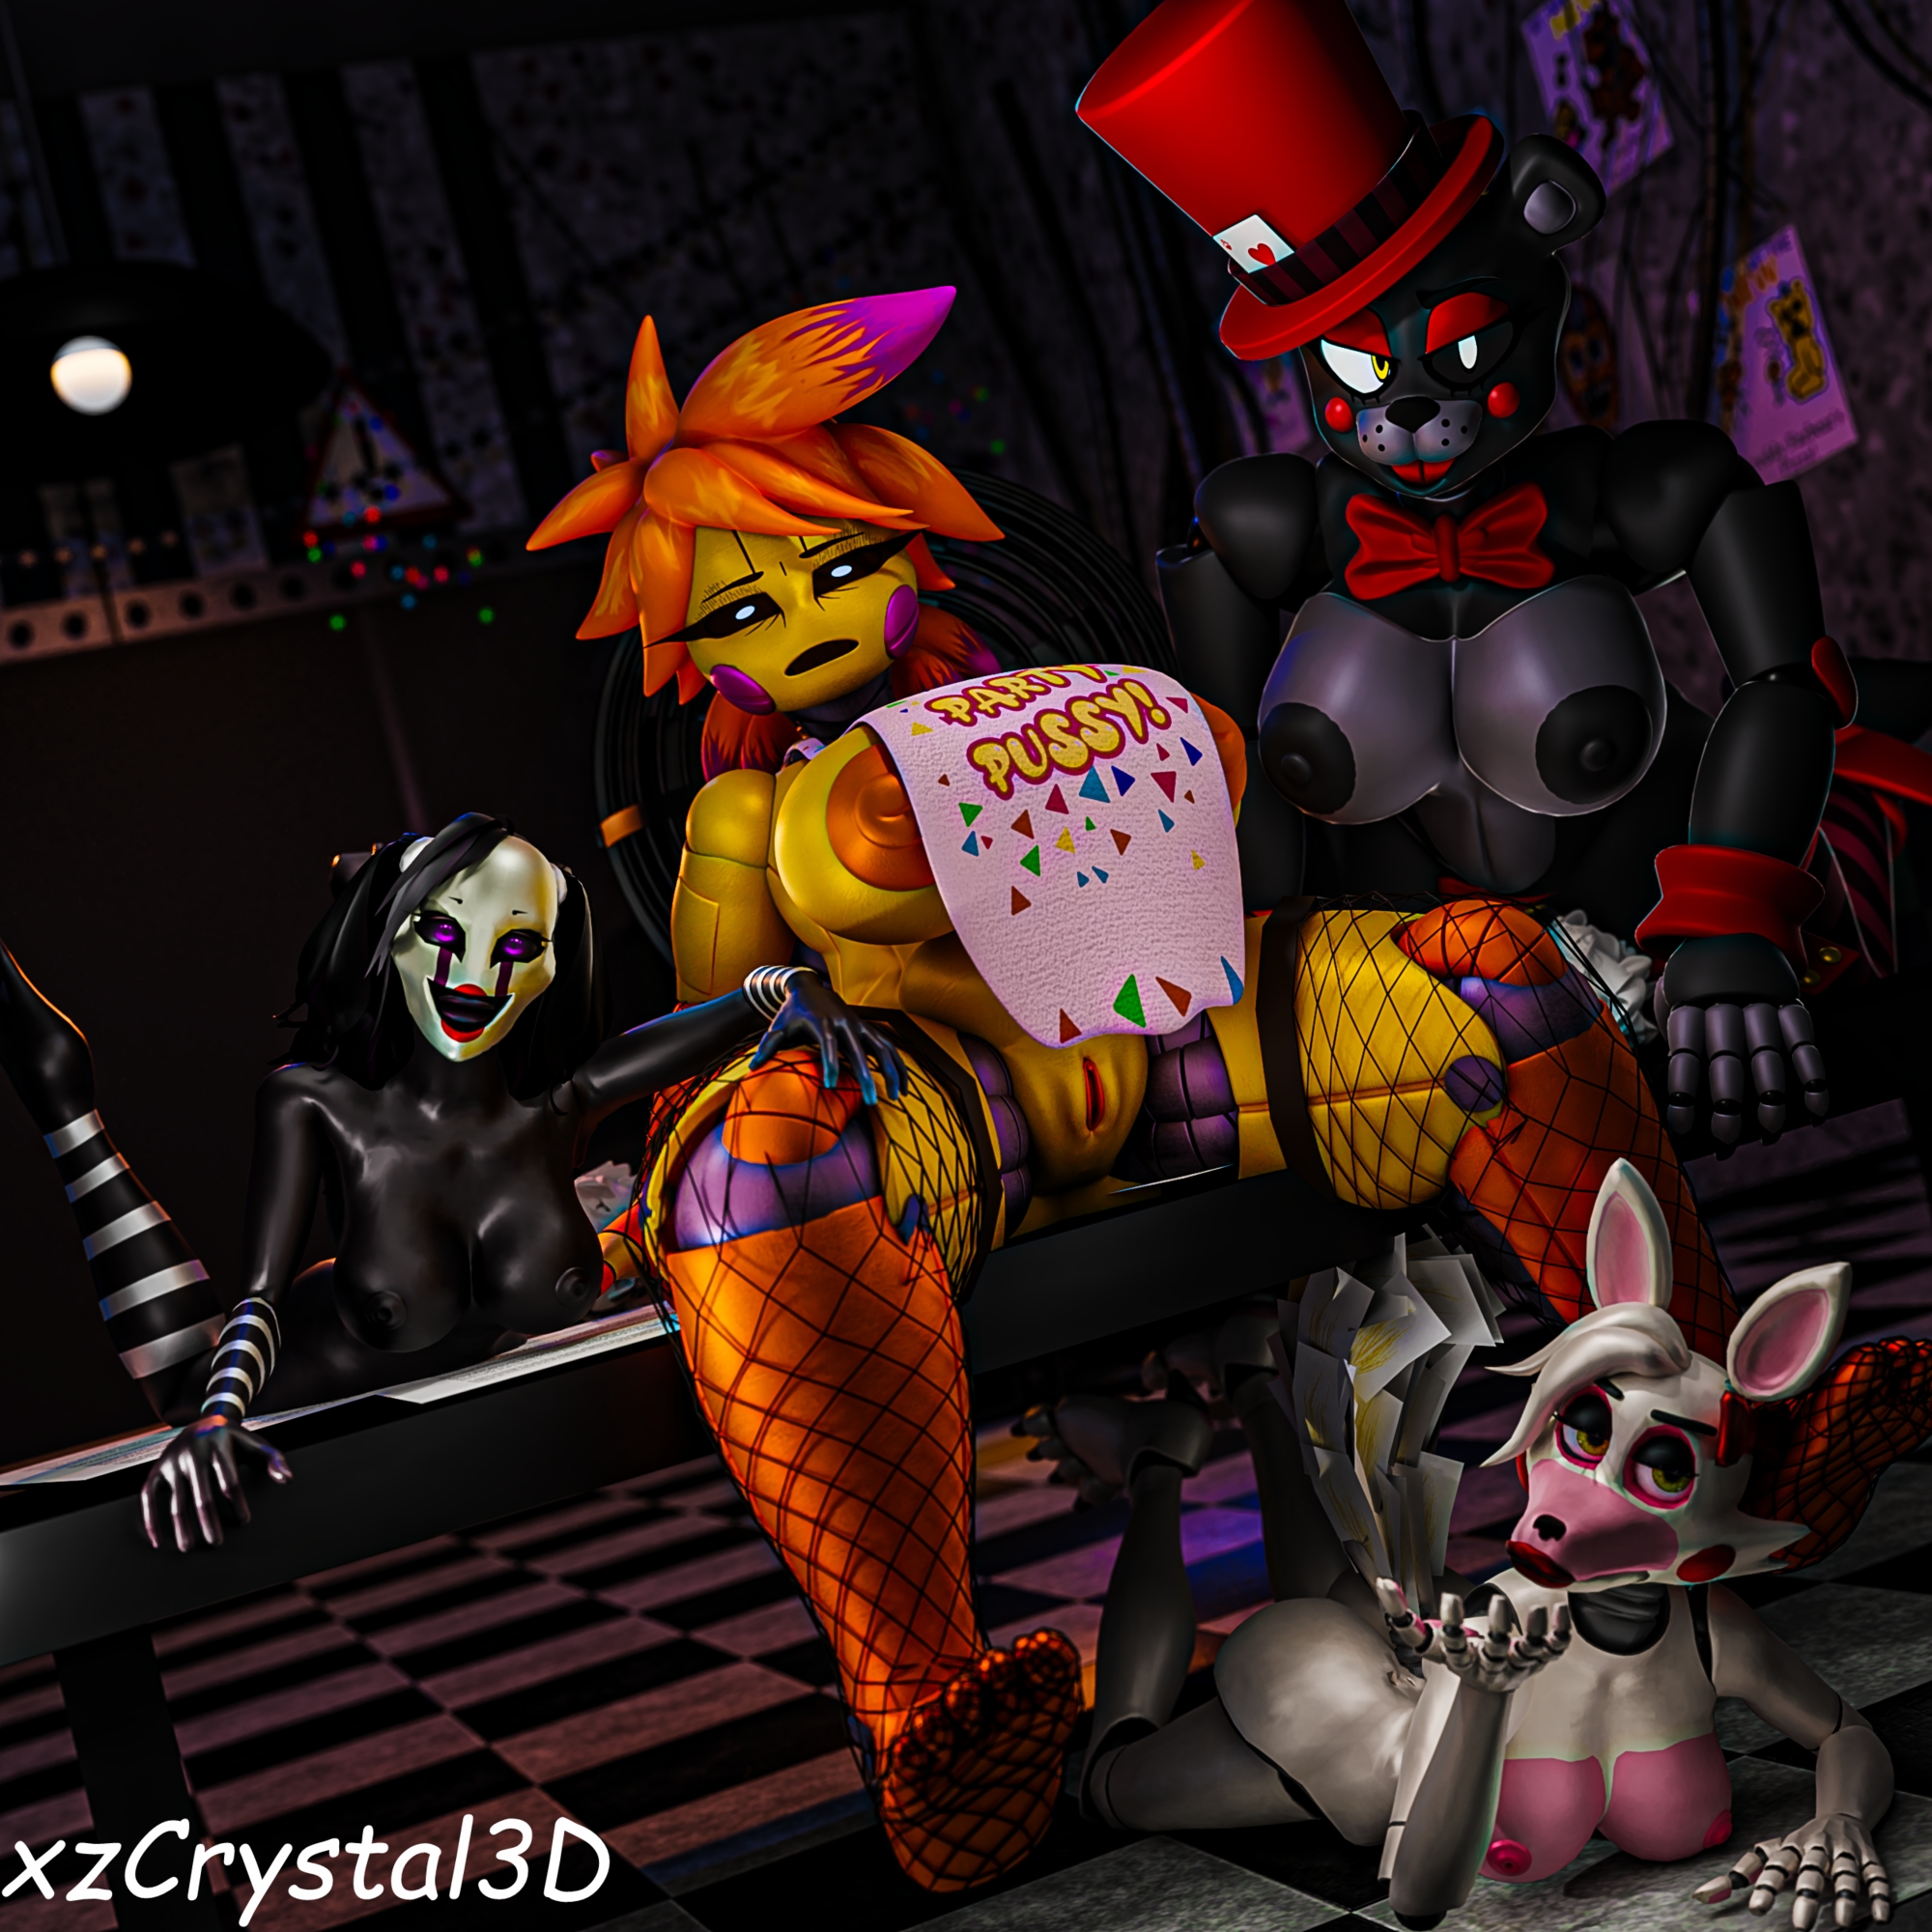 Welcome To Five Nights At Freddys Fnaf Five Nights At Freddys Chica (fivenightsatfreddys) Mangle Chica Puppet (fivenightsatfreddys) Robot Female Furry Anthro Yiff Rule34 R34 Pose